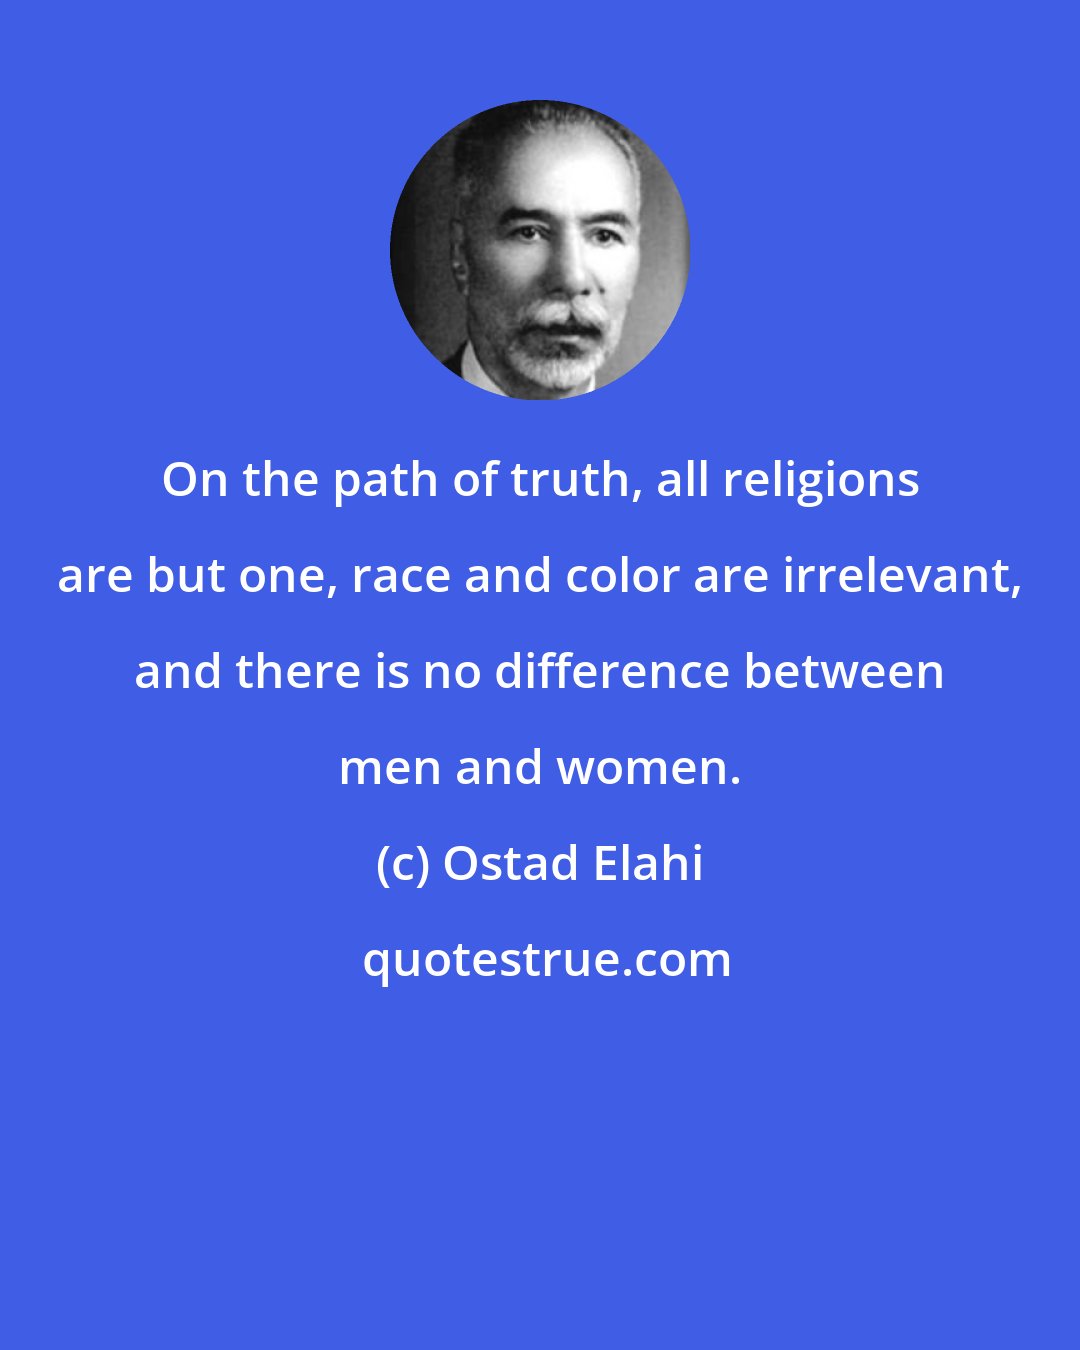 Ostad Elahi: On the path of truth, all religions are but one, race and color are irrelevant, and there is no difference between men and women.